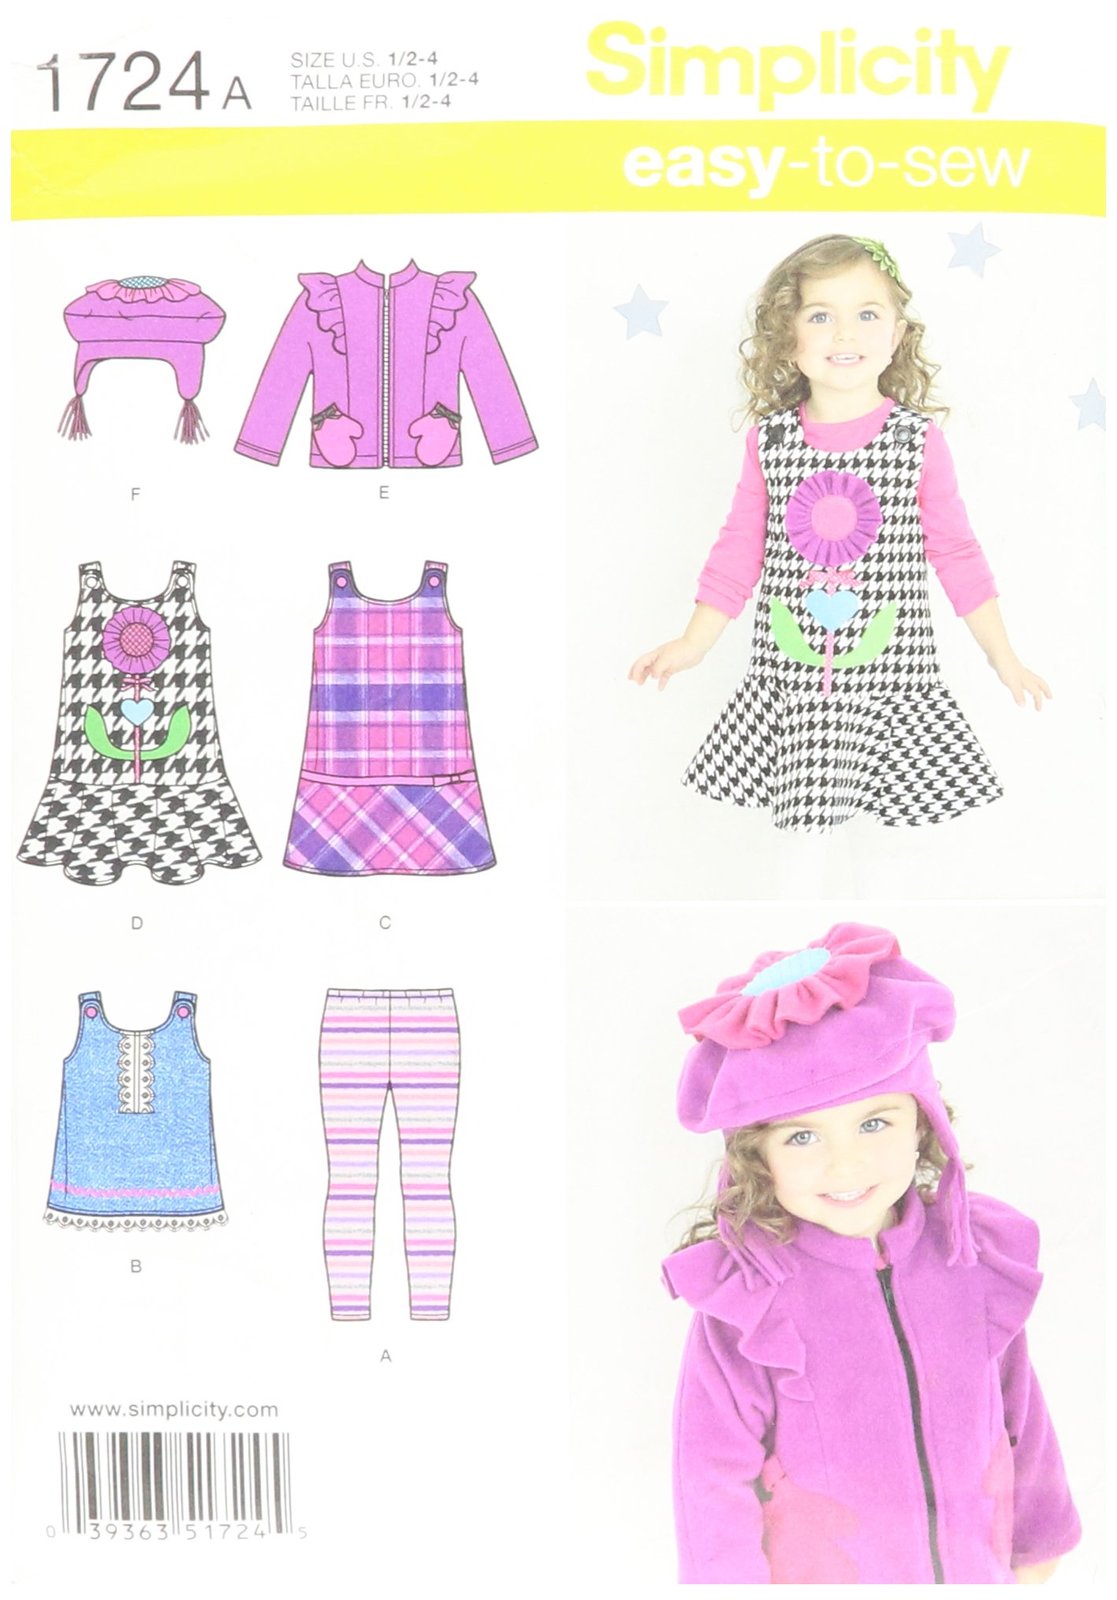 Simplicity Easy-to-Sew Pattern 1724 Toddlers Jumper or Top, Jacket, Fleece Hat a - $6.81